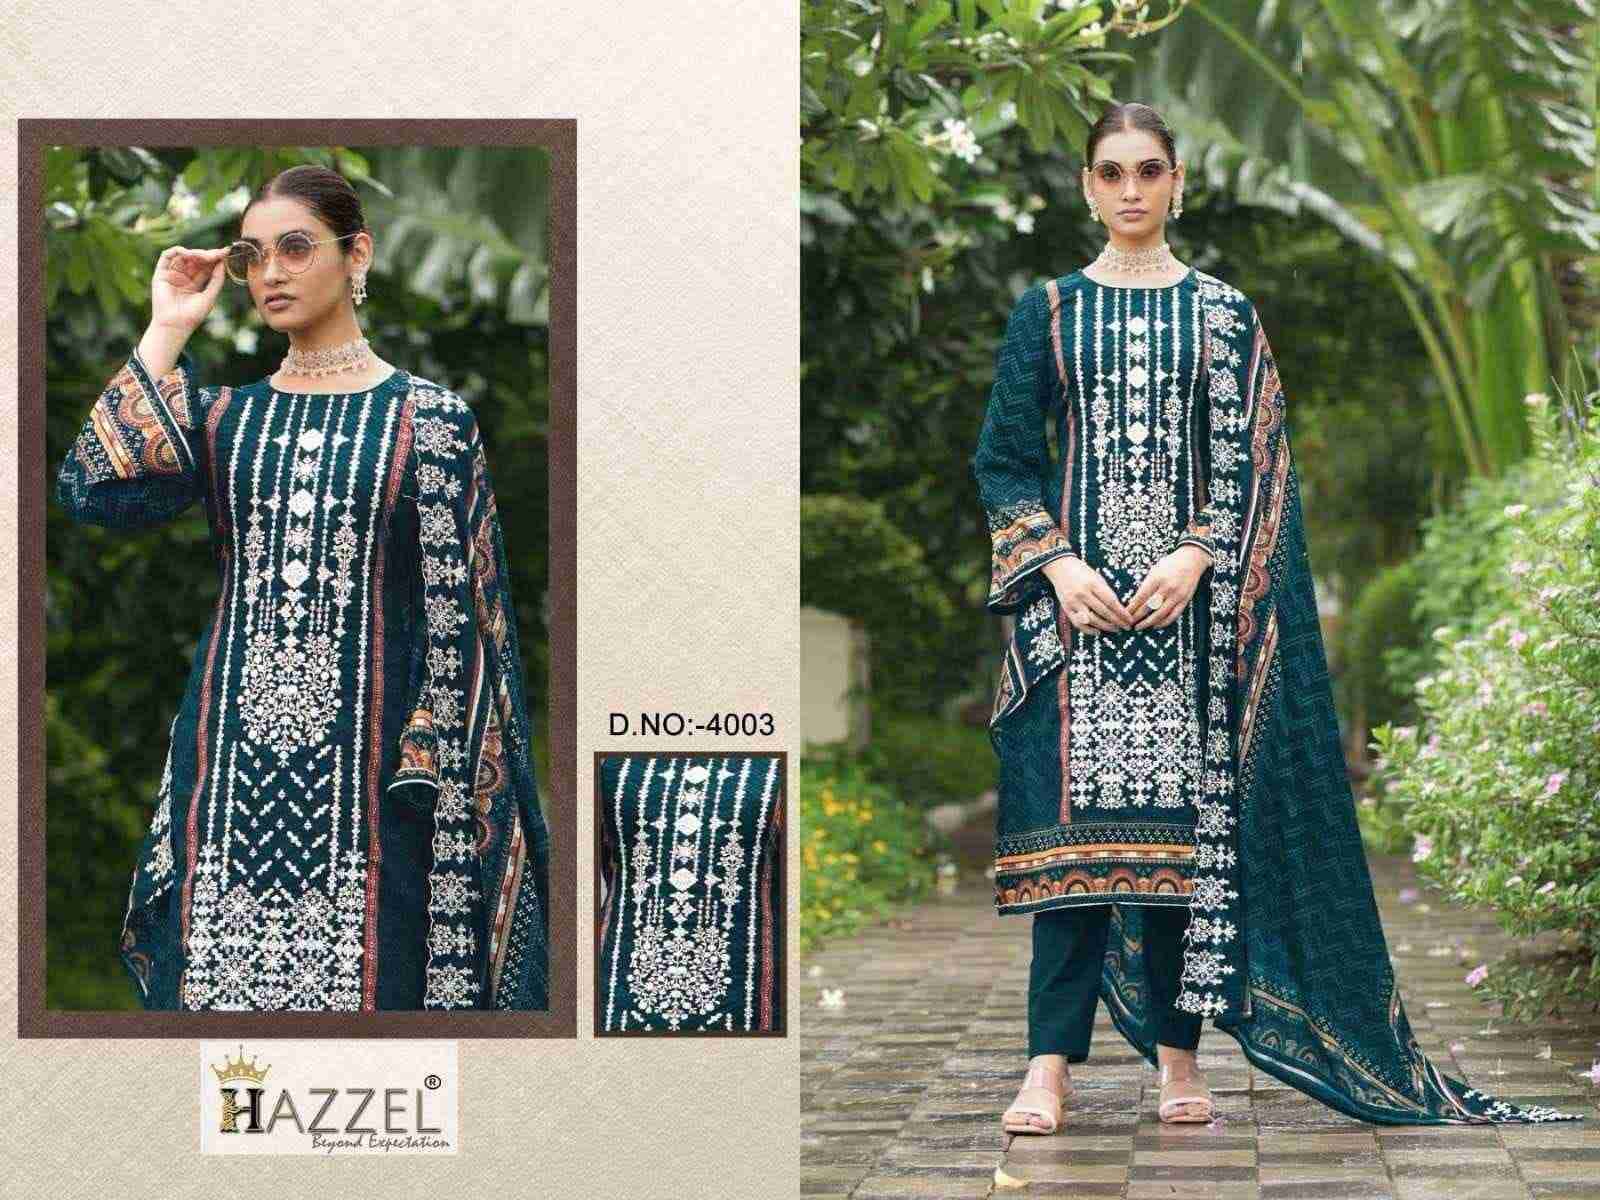 Bin Saeed Vol-4 By Hazzel 4001 To 4003 Series Designer Pakistani Suits Beautiful Fancy Stylish Colorful Party Wear & Occasional Wear Lawn Cotton Print Embroidery Dresses At Wholesale Price